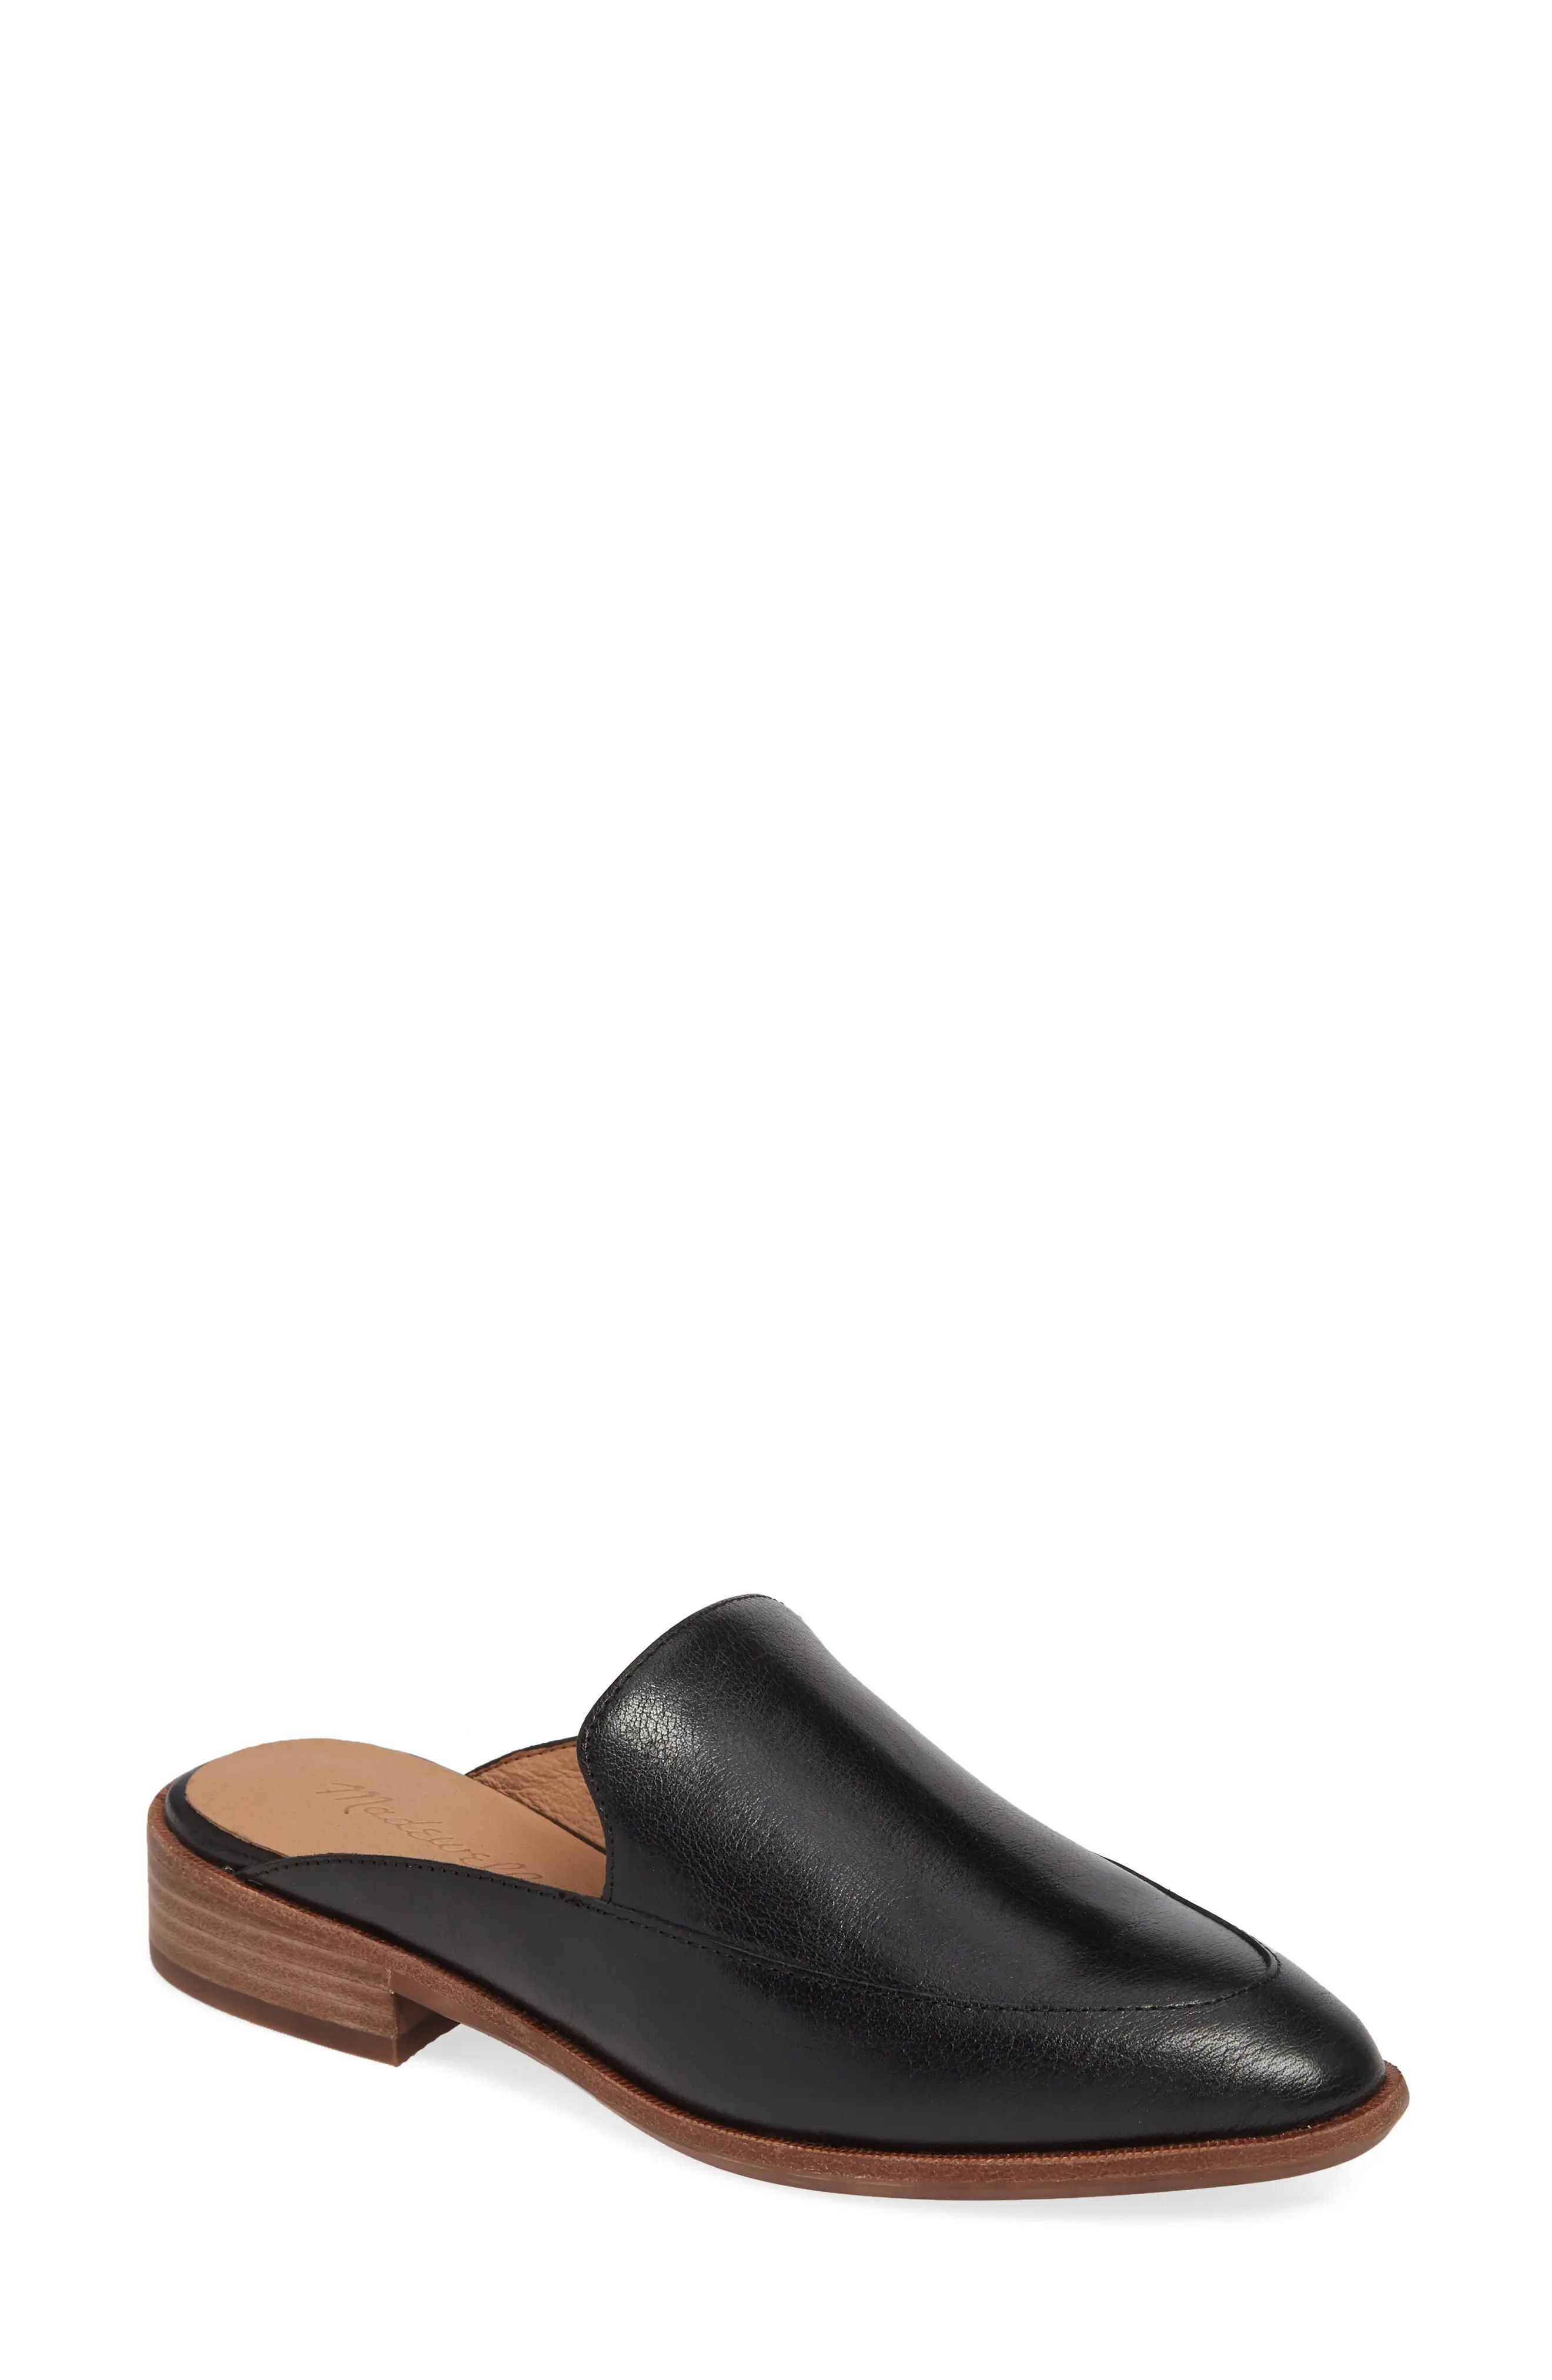 Women's Madewell The Frances Mule, Size 10 M - Black | Nordstrom